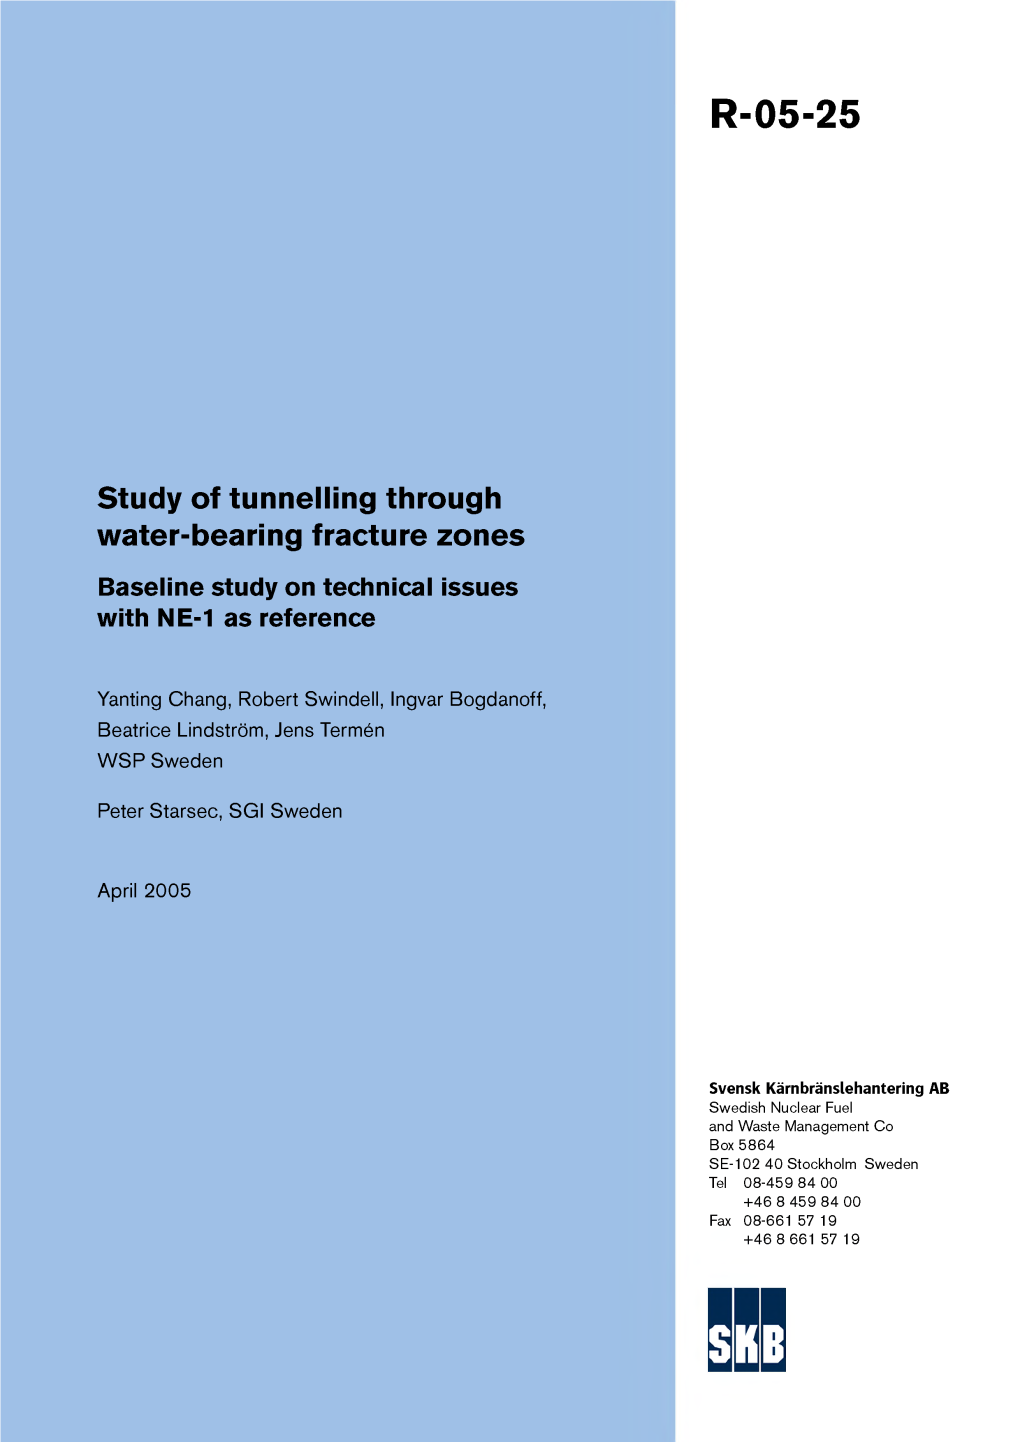 Study of Tunnelling Through Water-Bearing Fracture Zones Baseline Study on Technical Issues with NE-1 As Reference